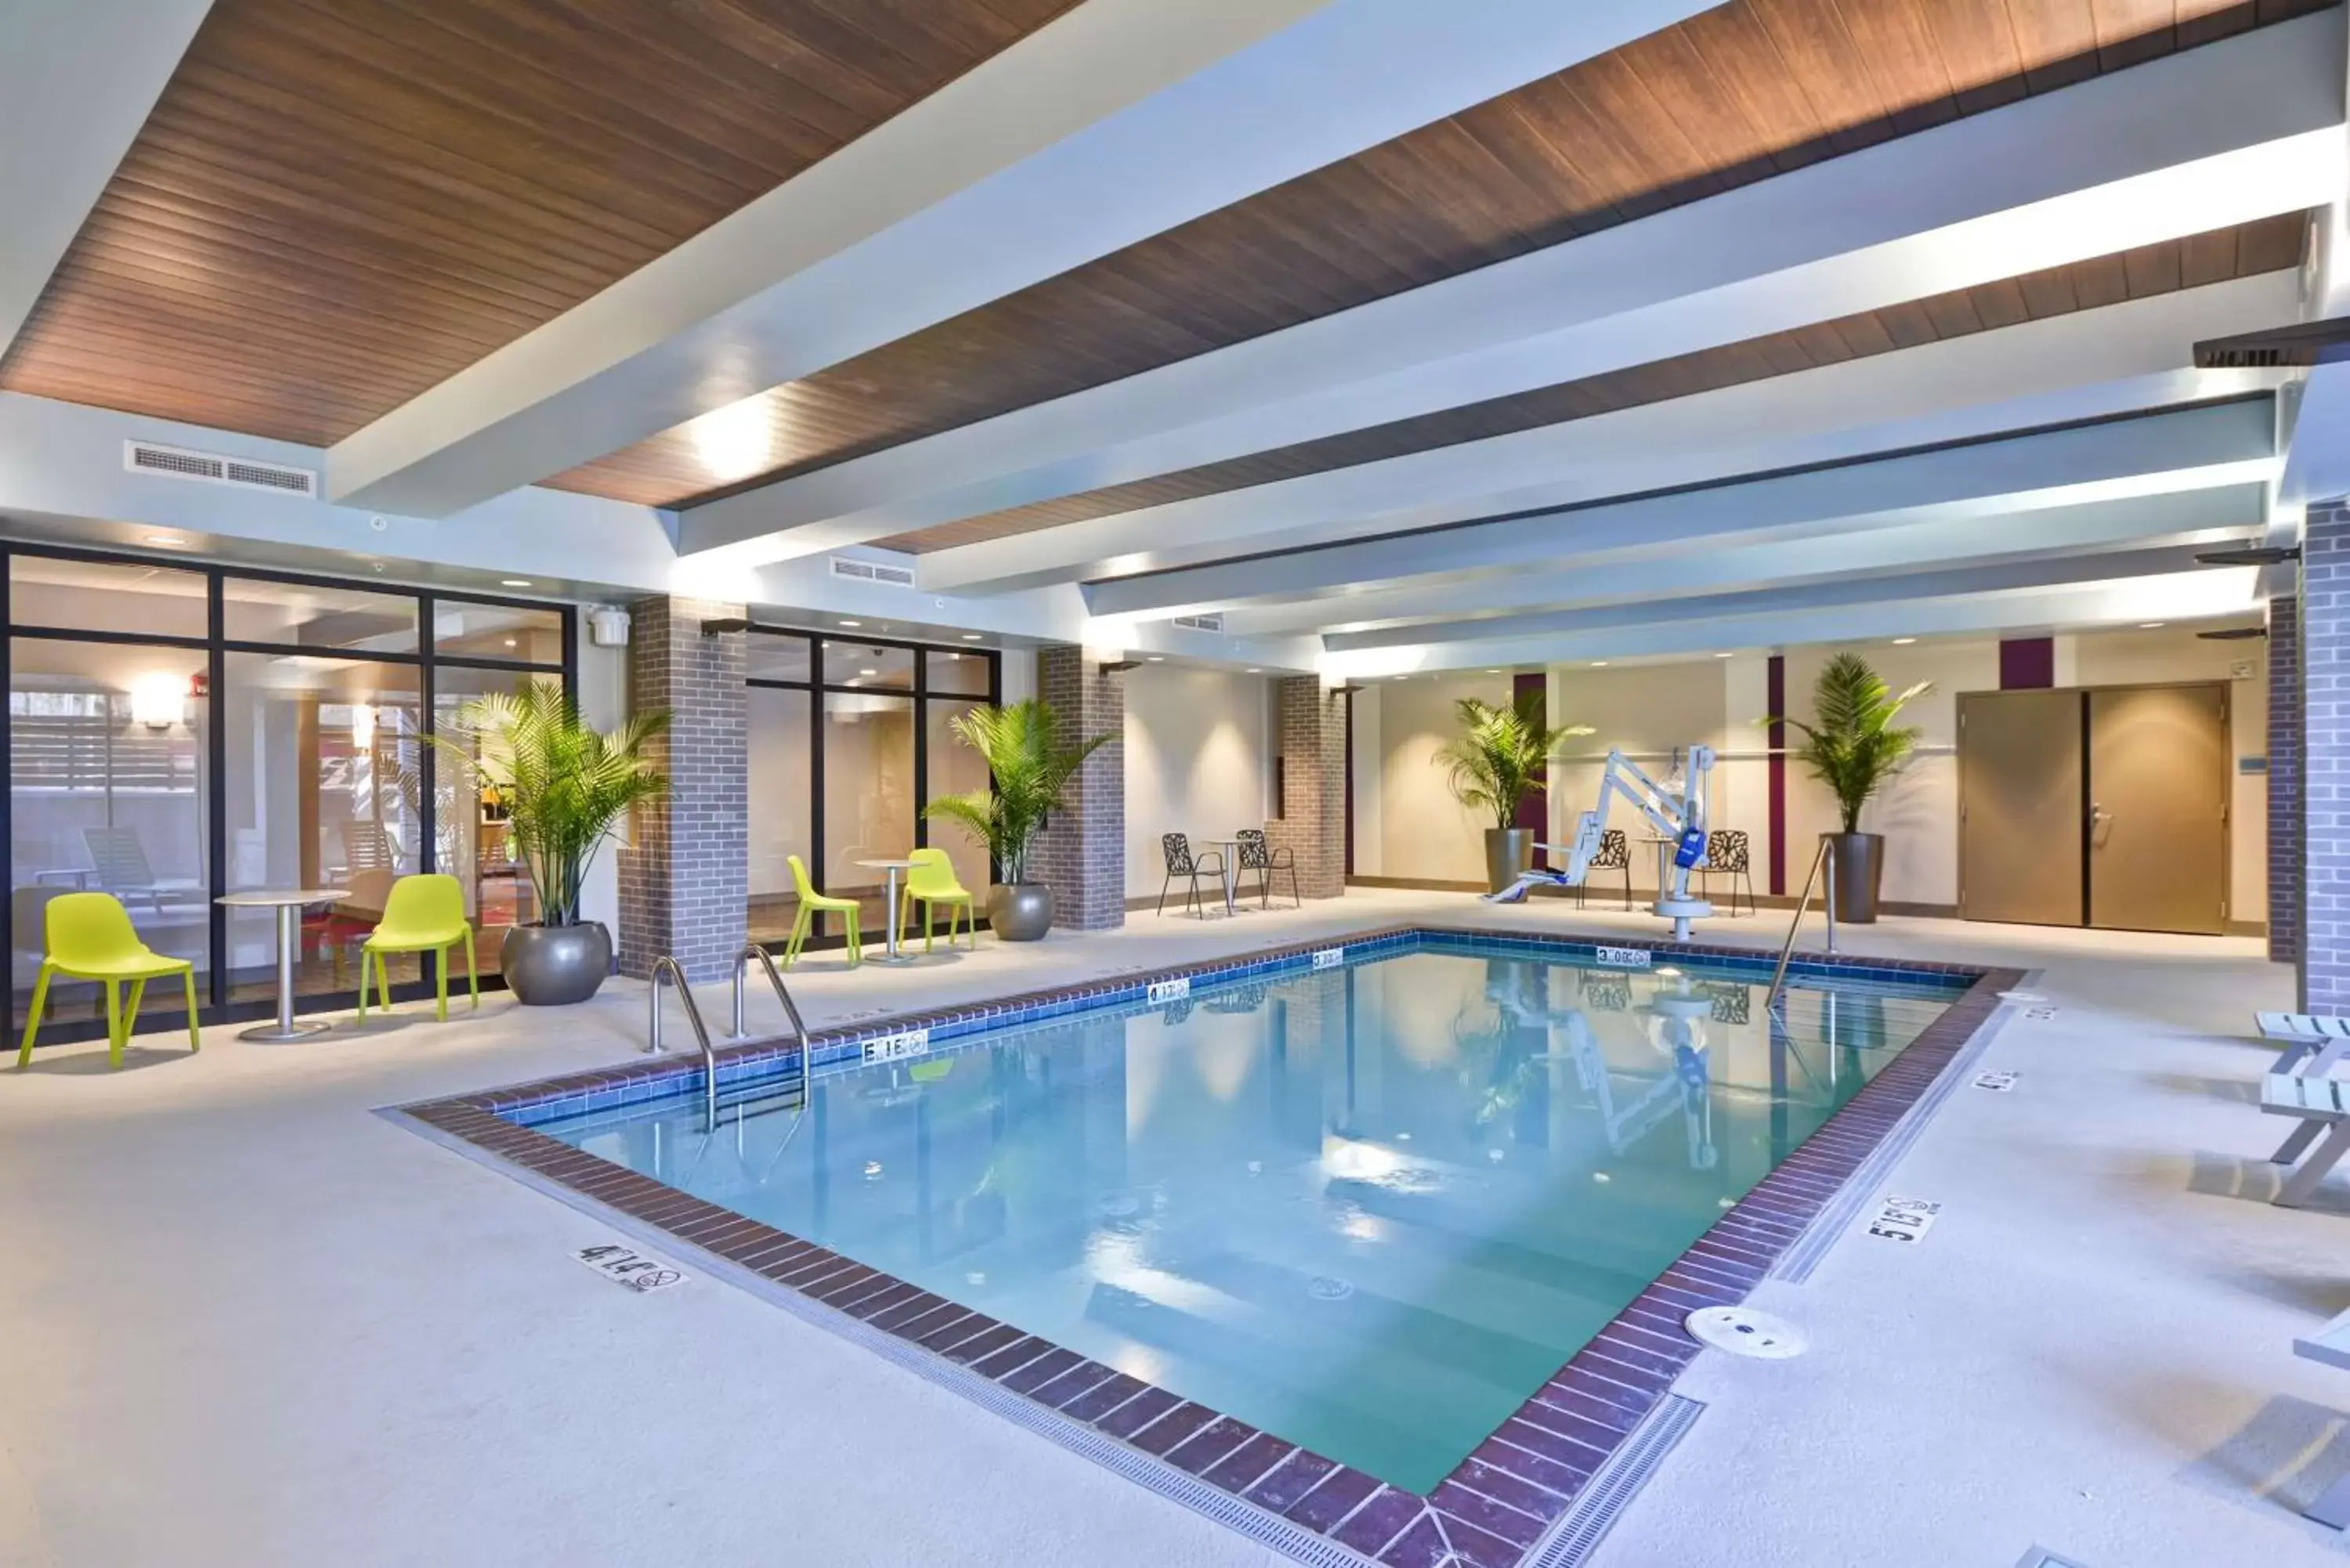 Swimming Pool in Home2 Suites by Hilton Kansas City KU Medical Center